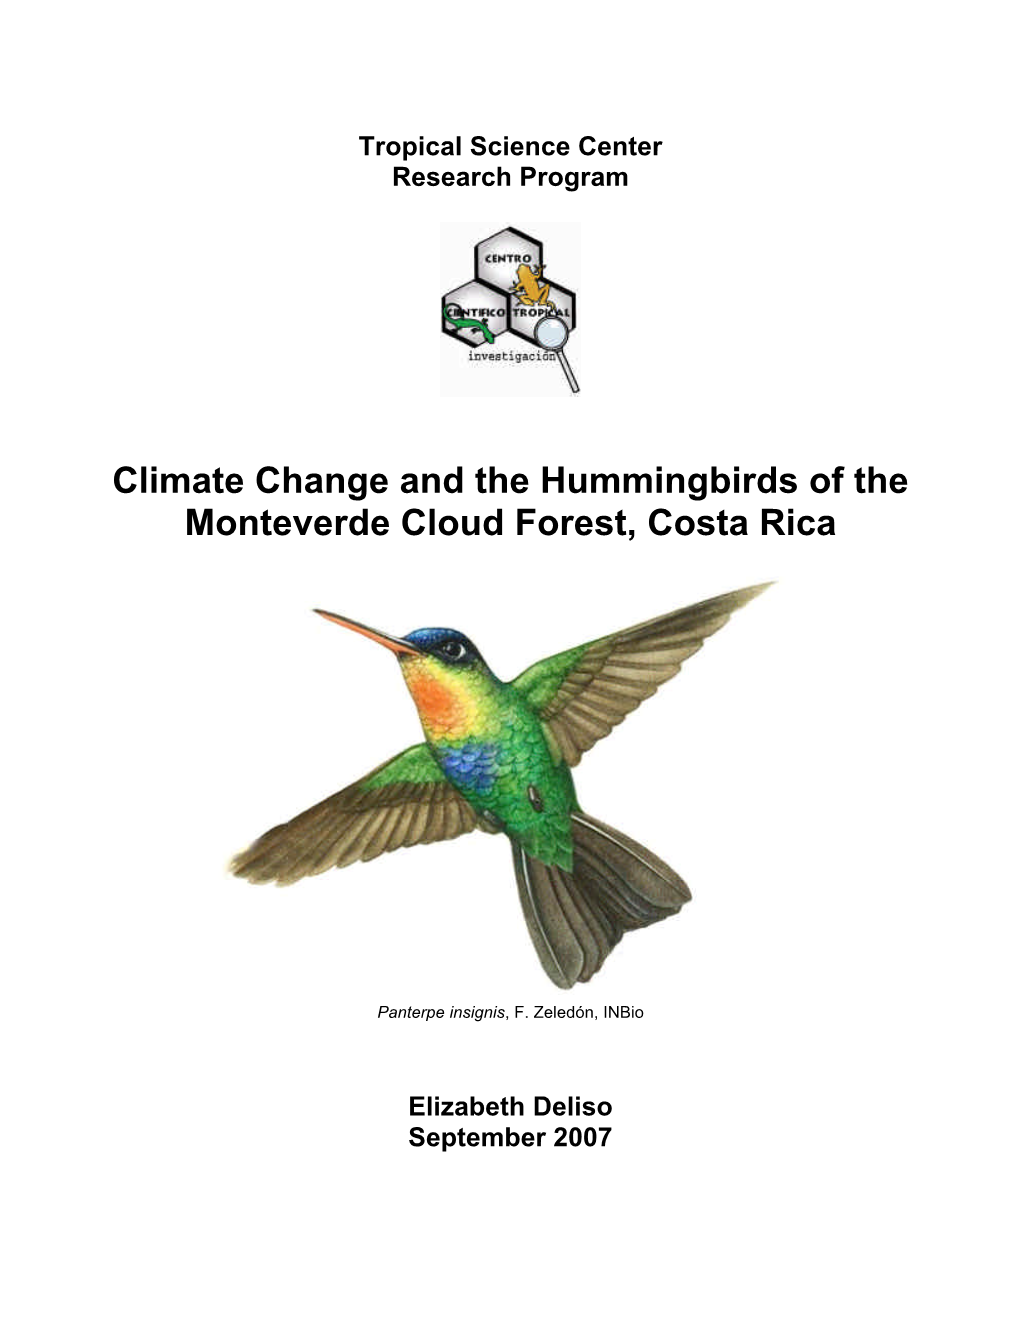 Climate Change and the Hummingbirds of the Monteverde Cloud Forest, Costa Rica